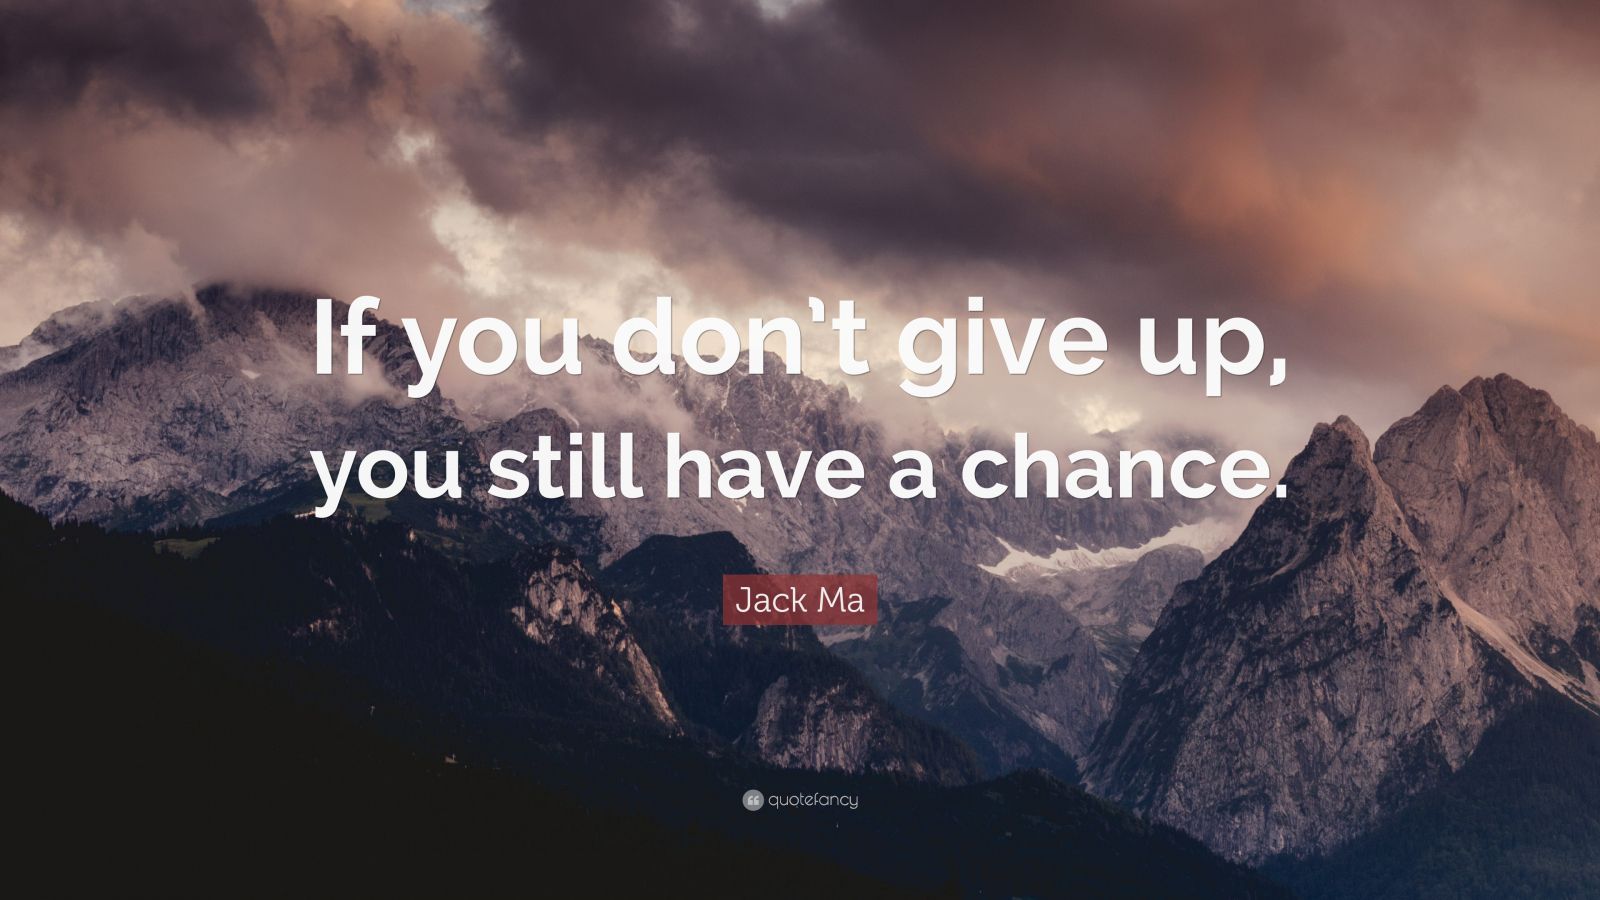 Jack Ma Quote: “If you don’t give up, you still have a chance.” (12